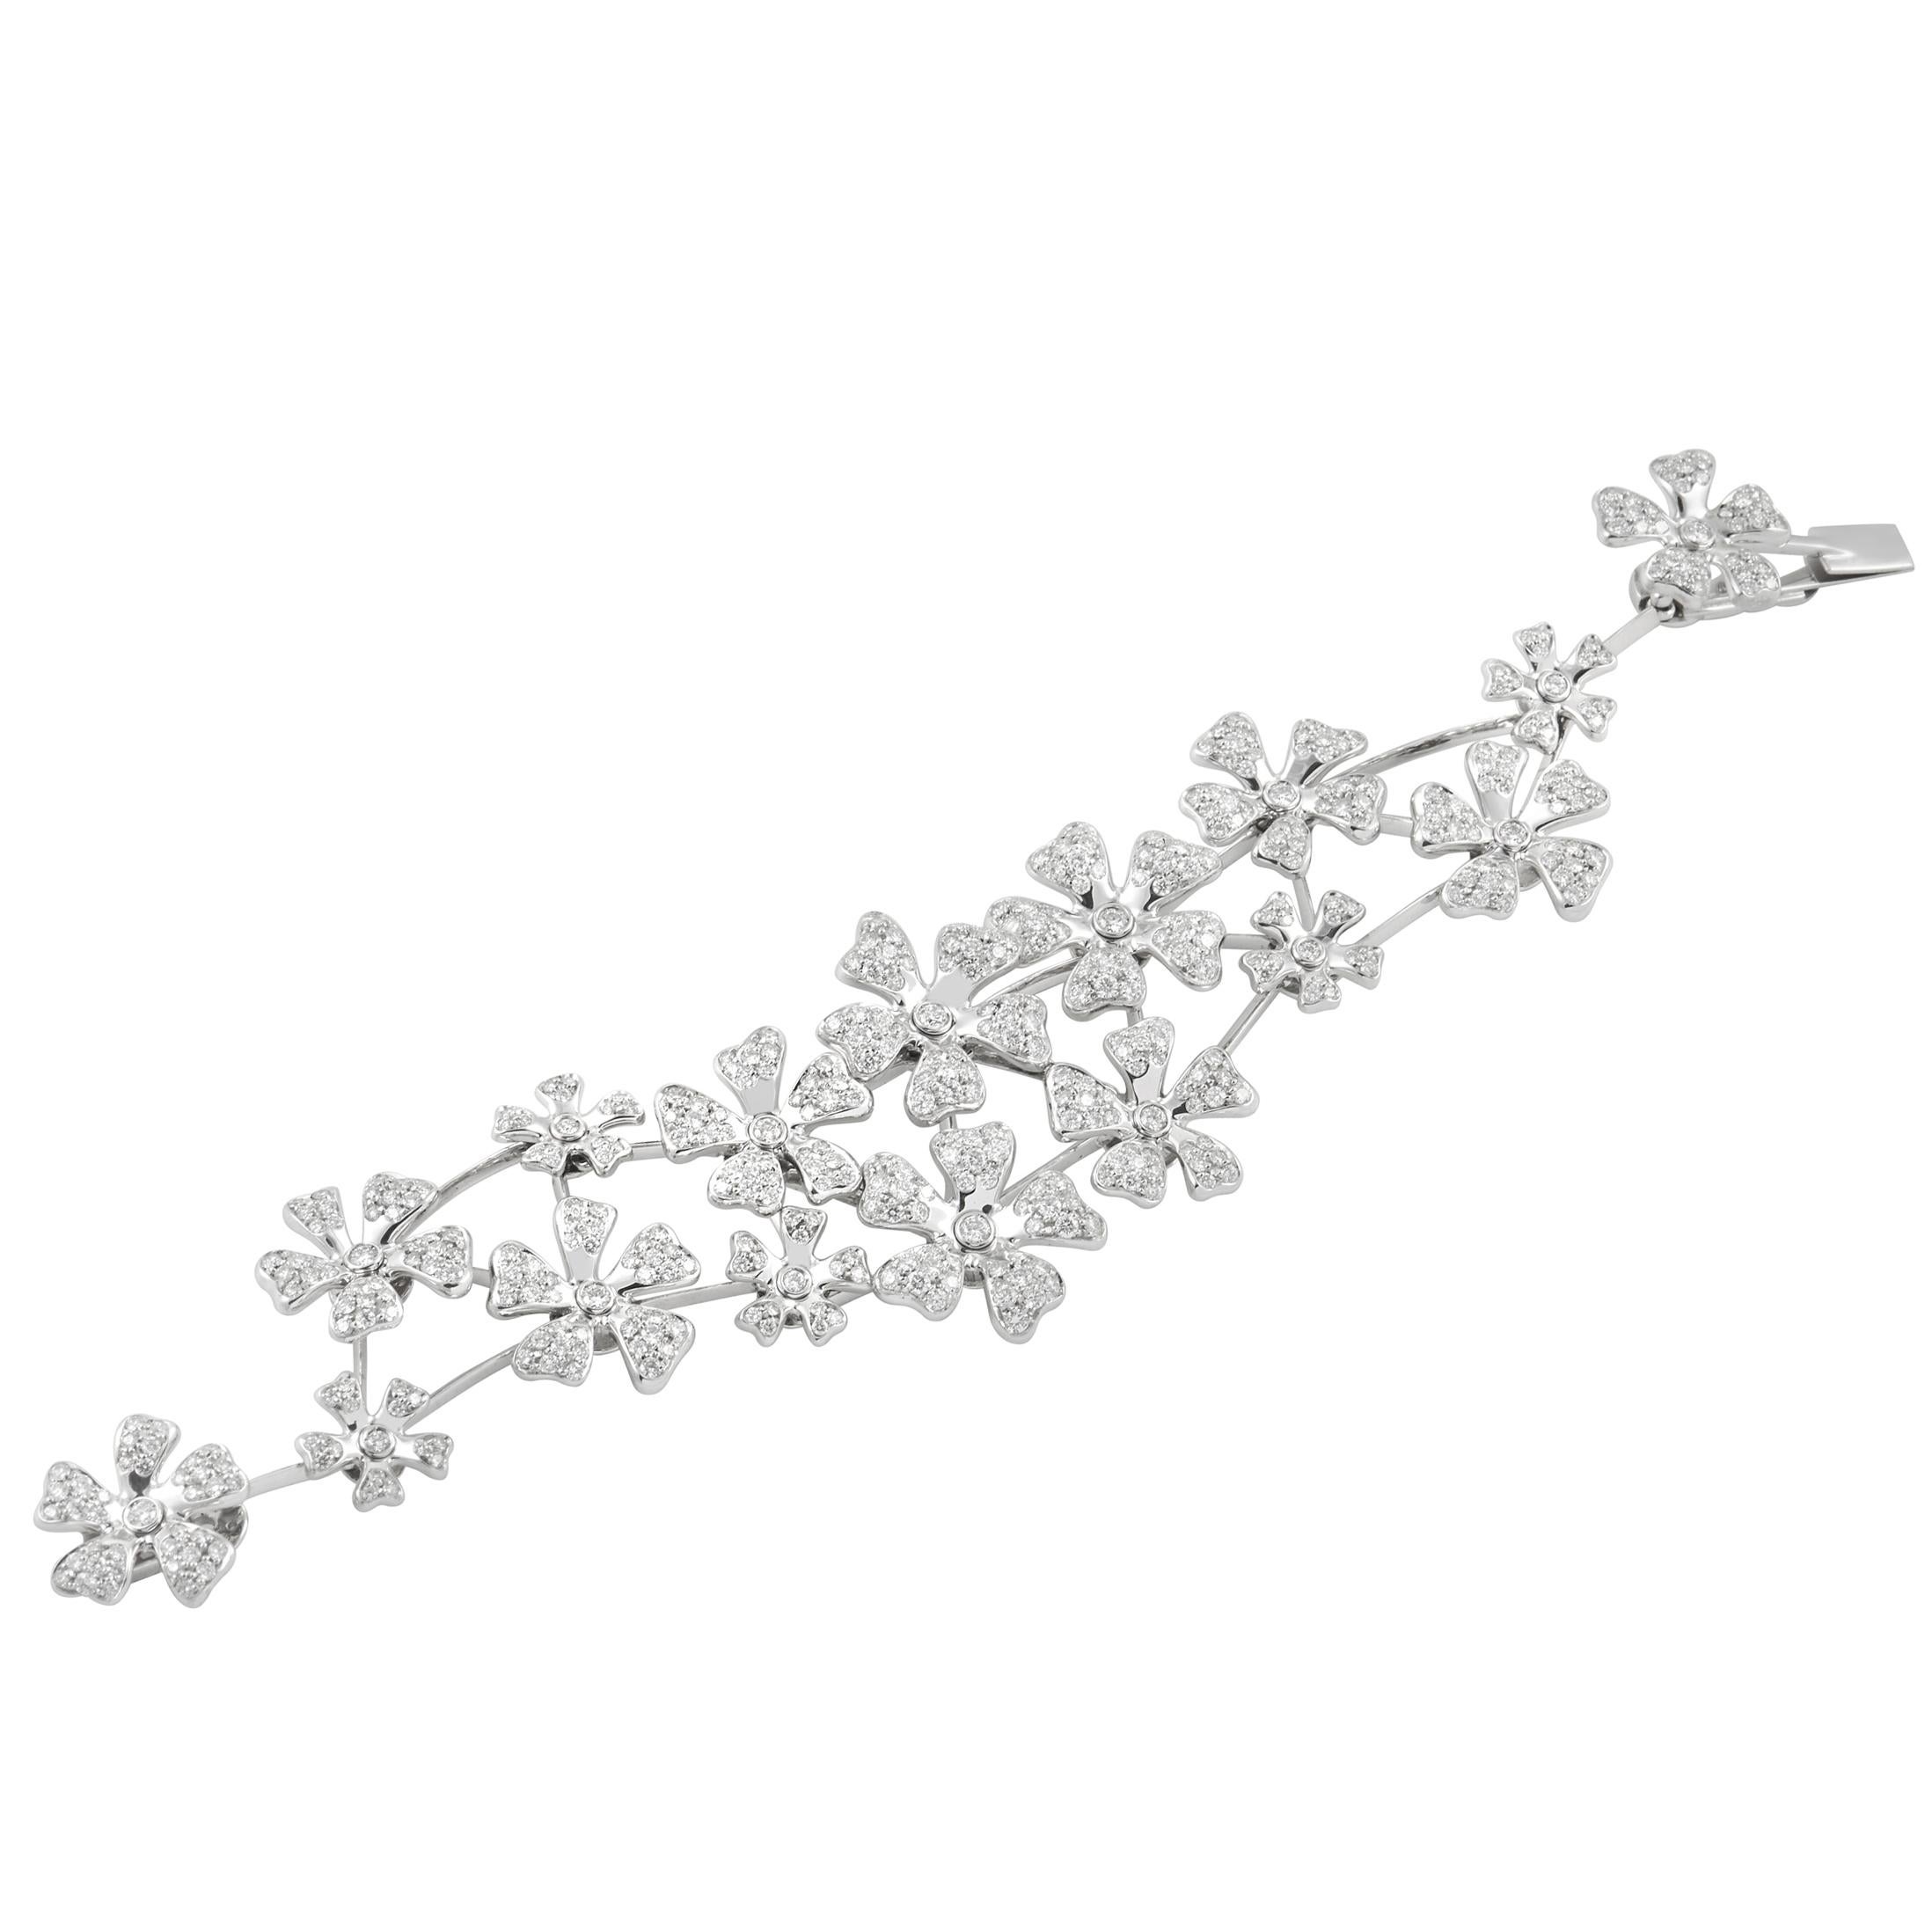 This De Beers bracelet is a stunning accessory. The bracelet is crafted from 18K white gold, and wraps around the wrist with a linked flower pattern. The bracelet is set with 7.00 carats of sparkling round diamonds throughout, and has a total length